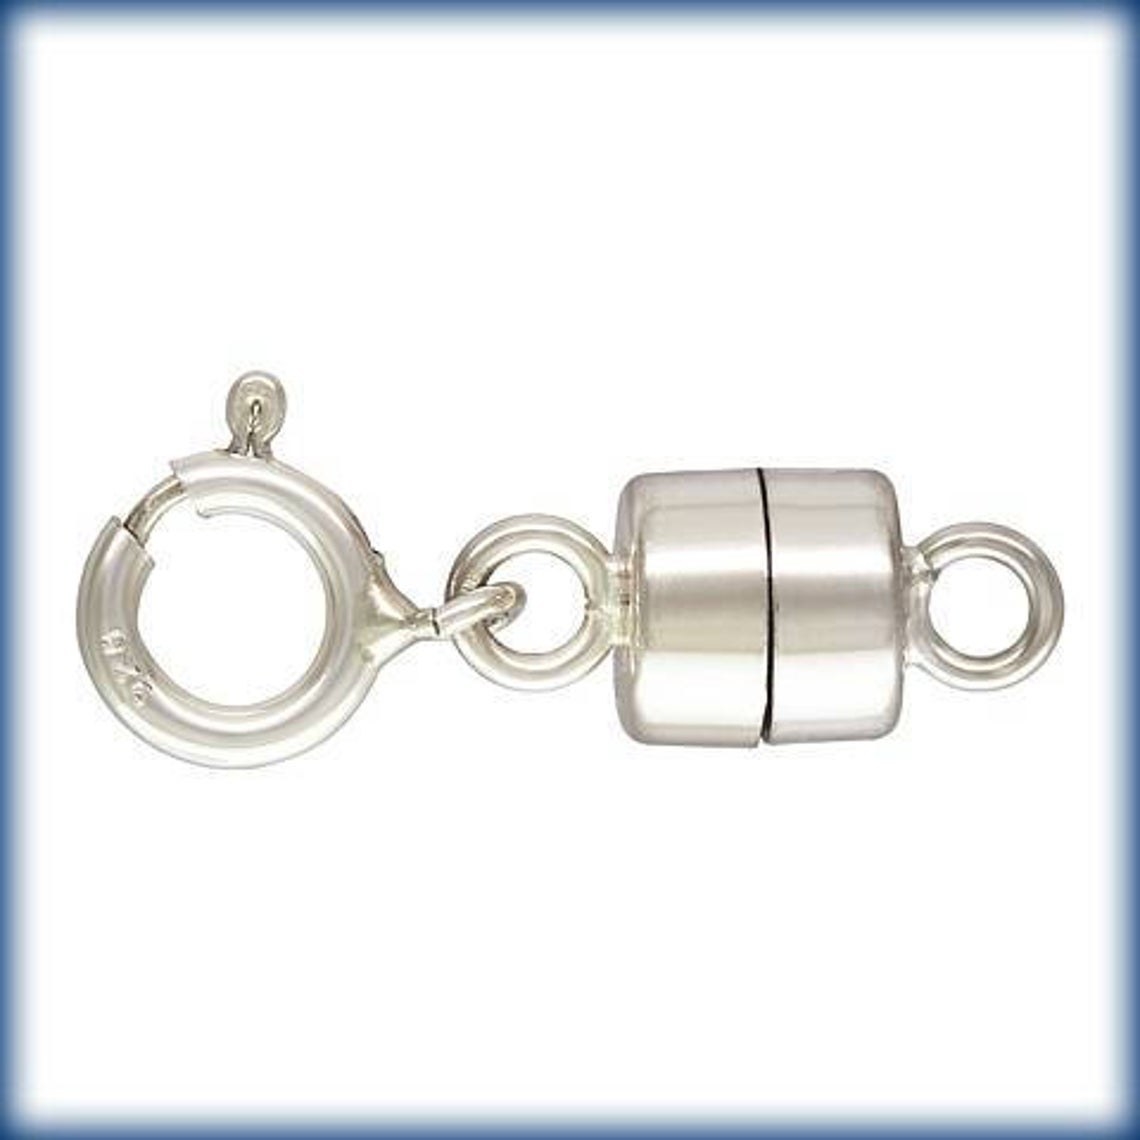 The magnetic clasp converter